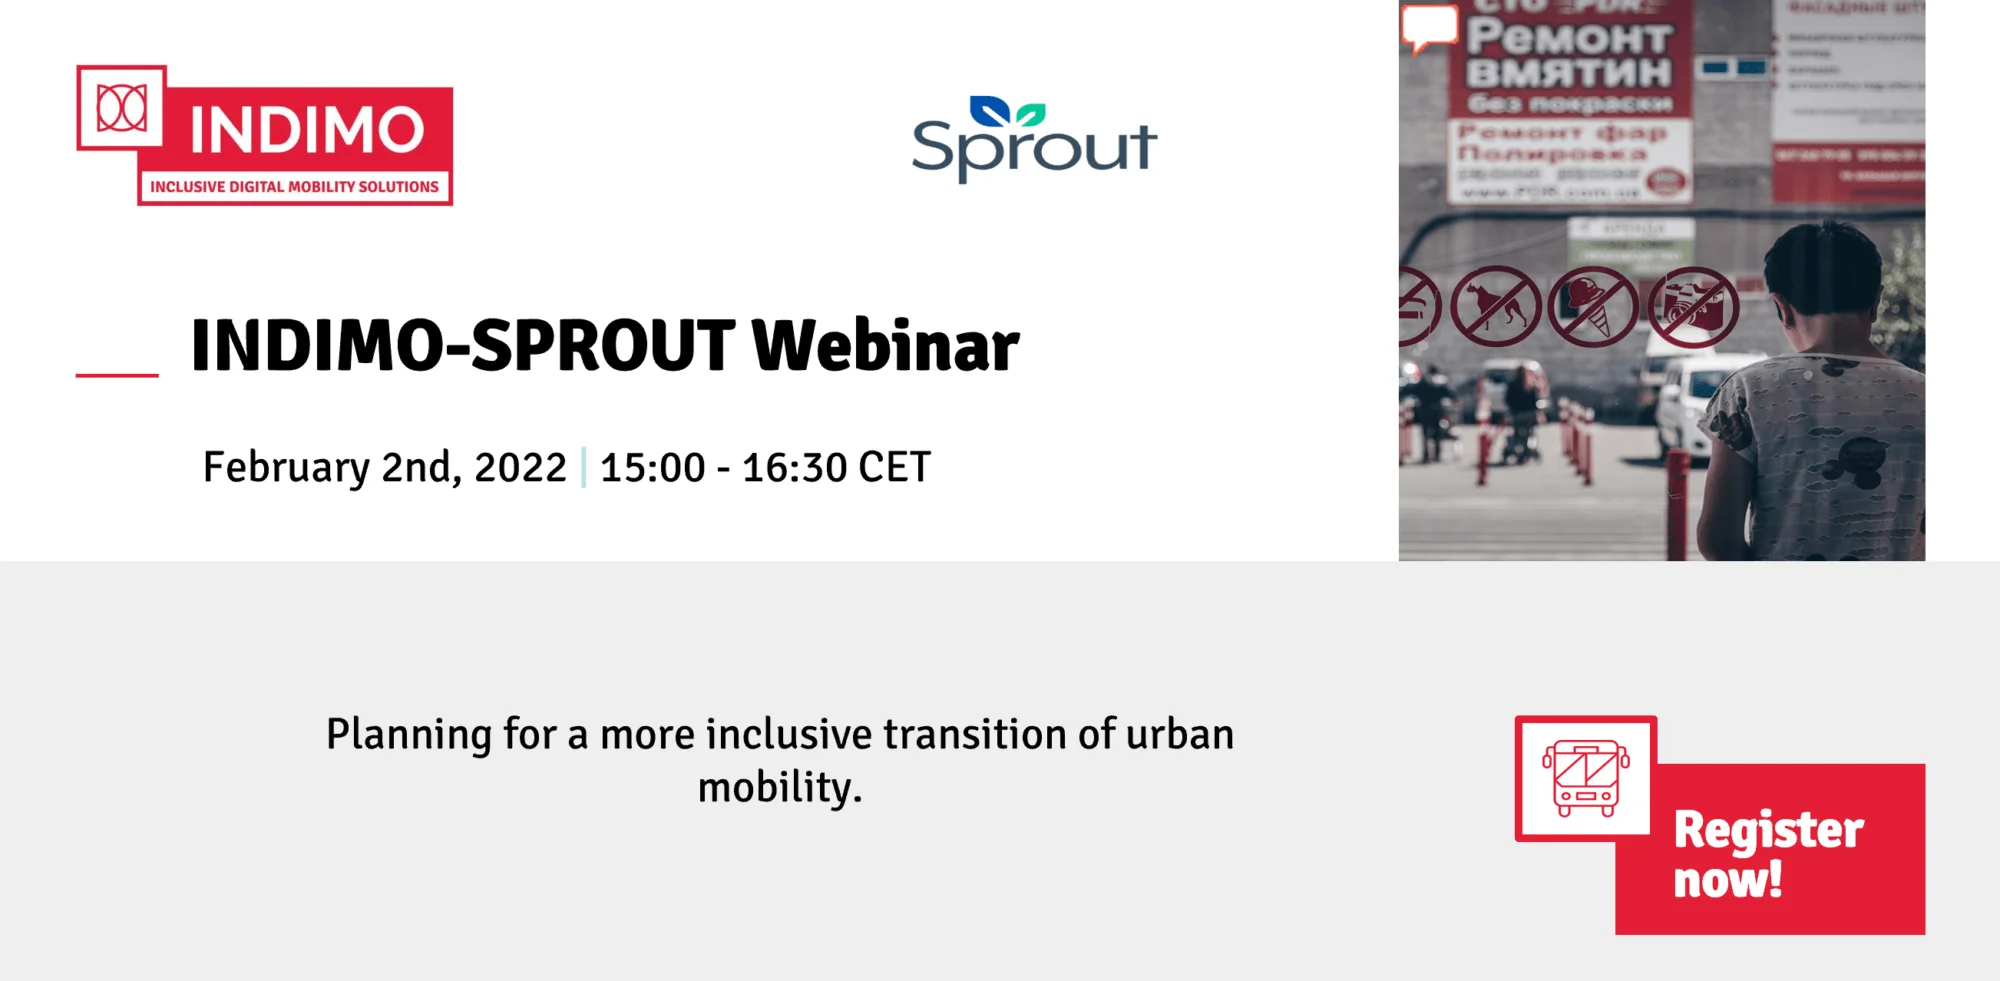 INDIMO-SPROUT Webinar: Planning for a more inclusive transition of urban mobility